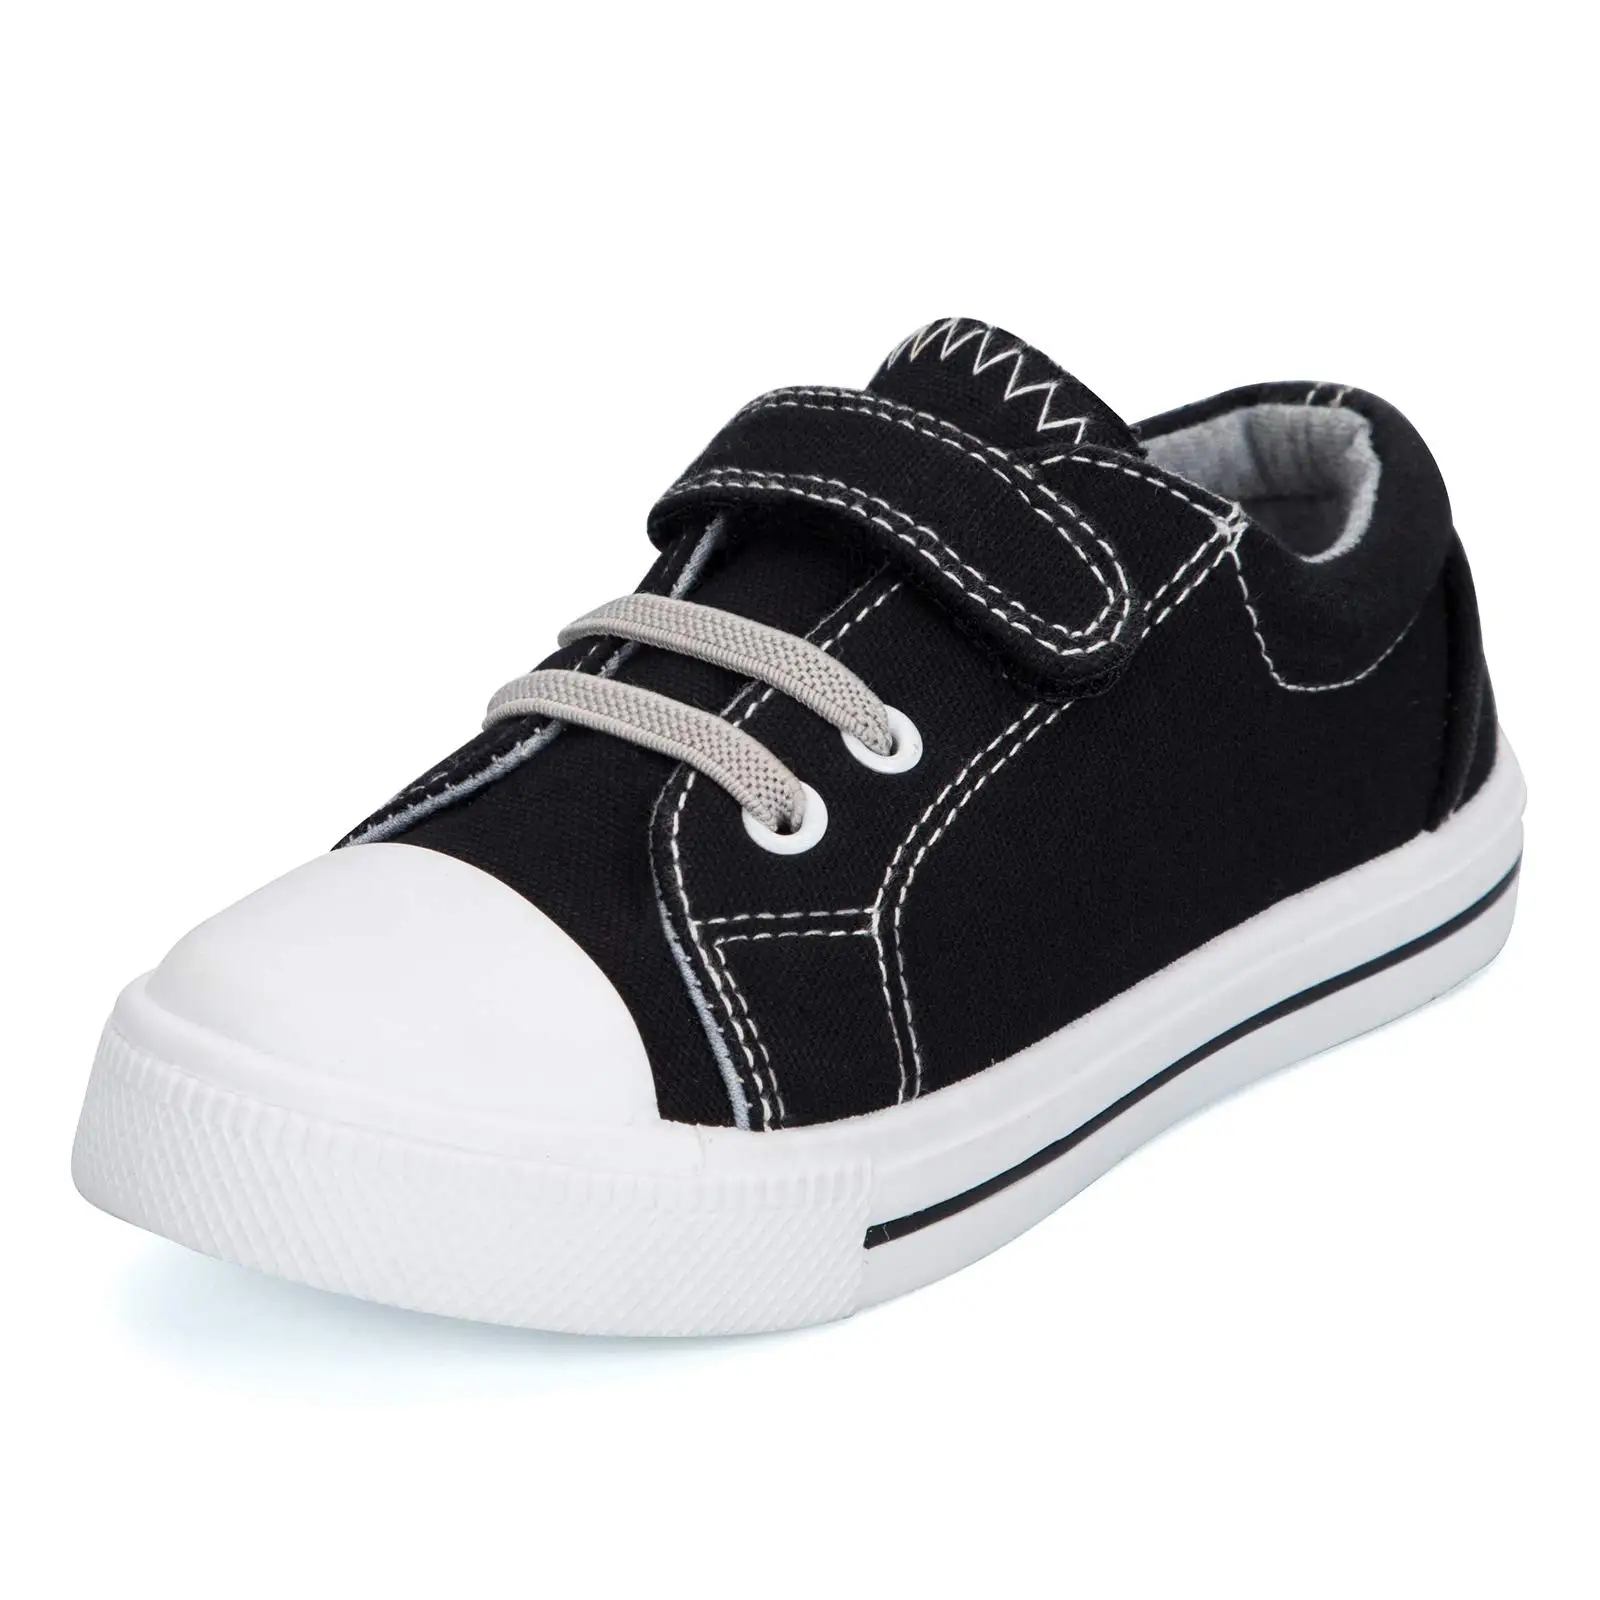 High quality soft leather hook&loop unisex baby boys girls students shoes sneakers